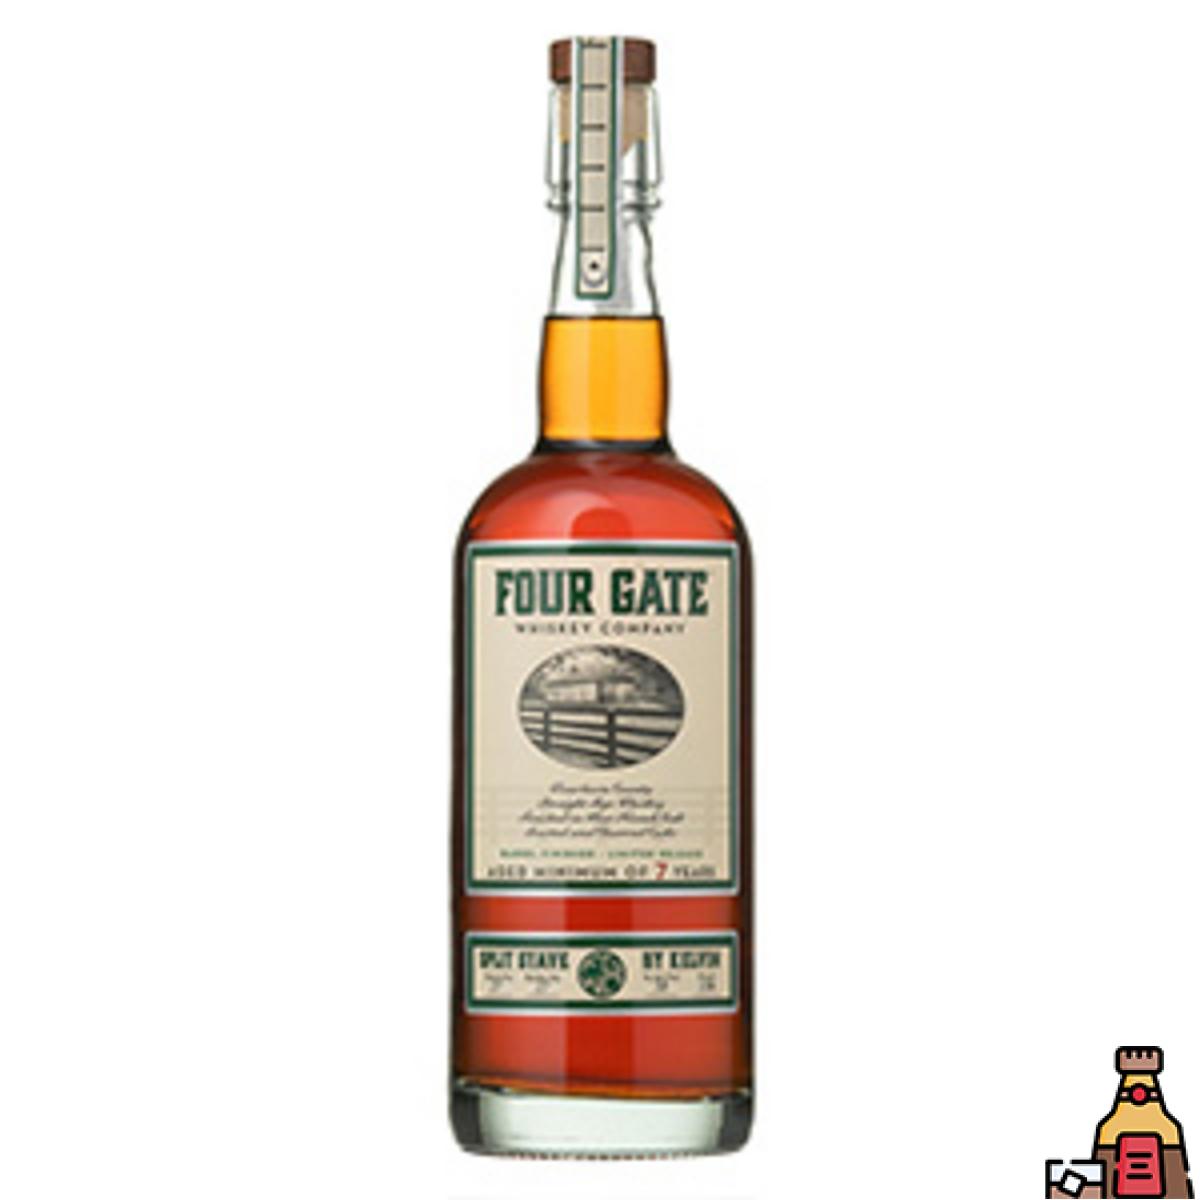 Four Gate Split Stave 7 year old (Batch 27) Review